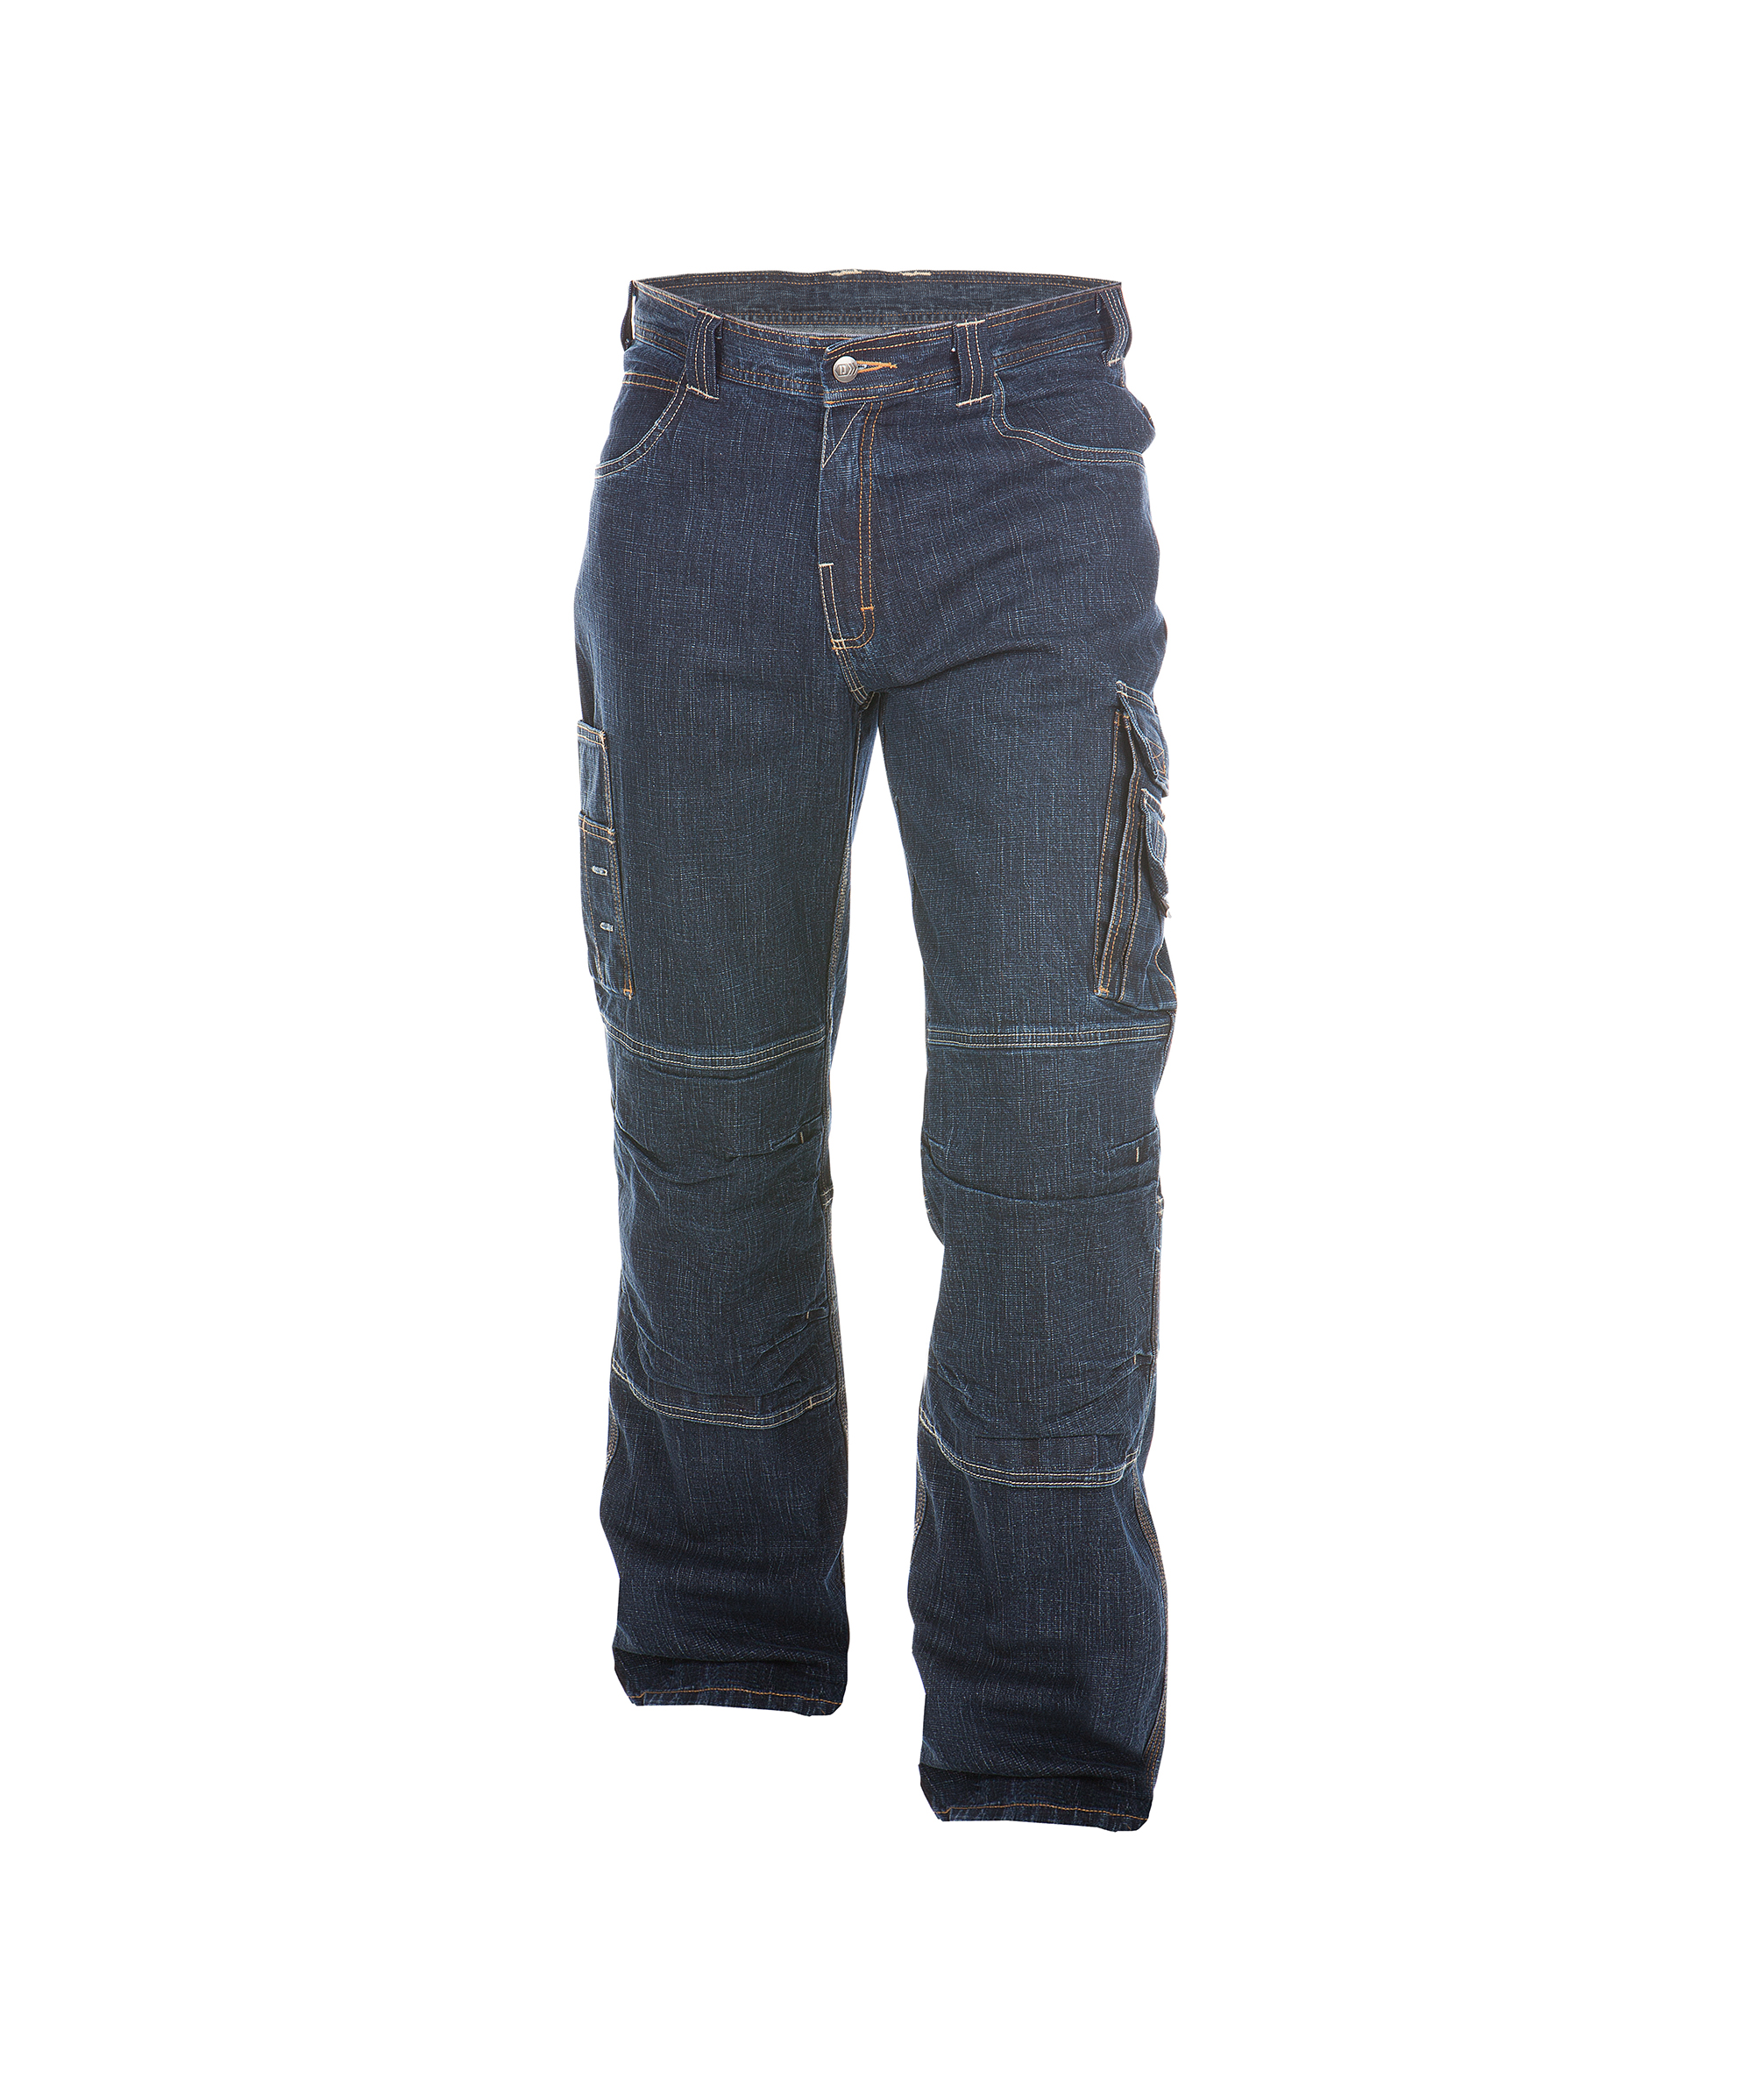 knoxville_stretch-jeans-work-trousers-with-knee-pockets_jeans-blue_front.jpg